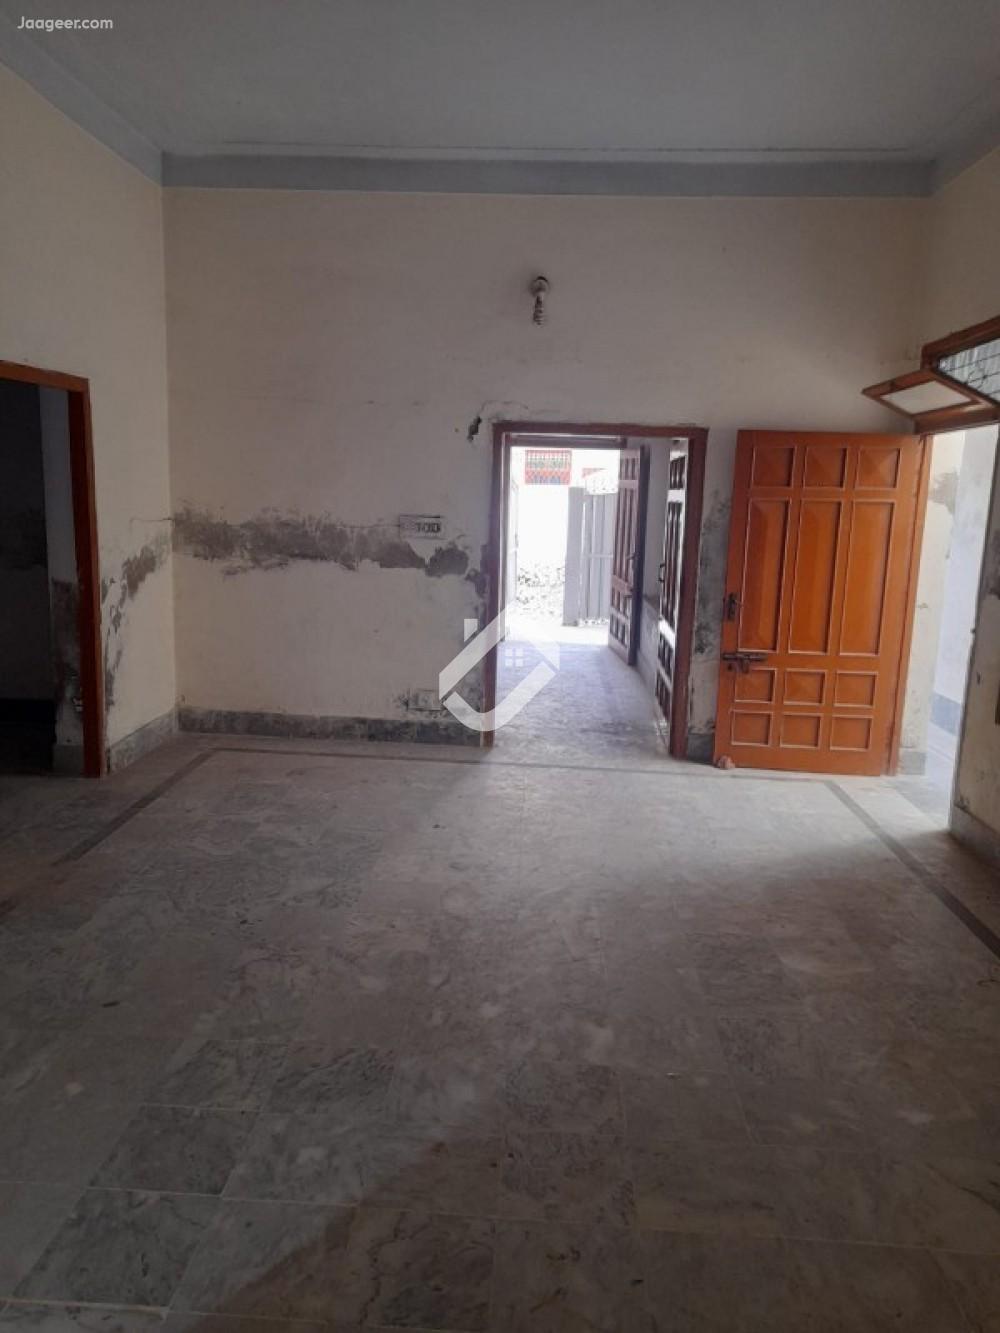 5 Marla Lower Portion House For Rent In Cheema Colony University Road Link Queen's Road in Cheema Colony, Sargodha